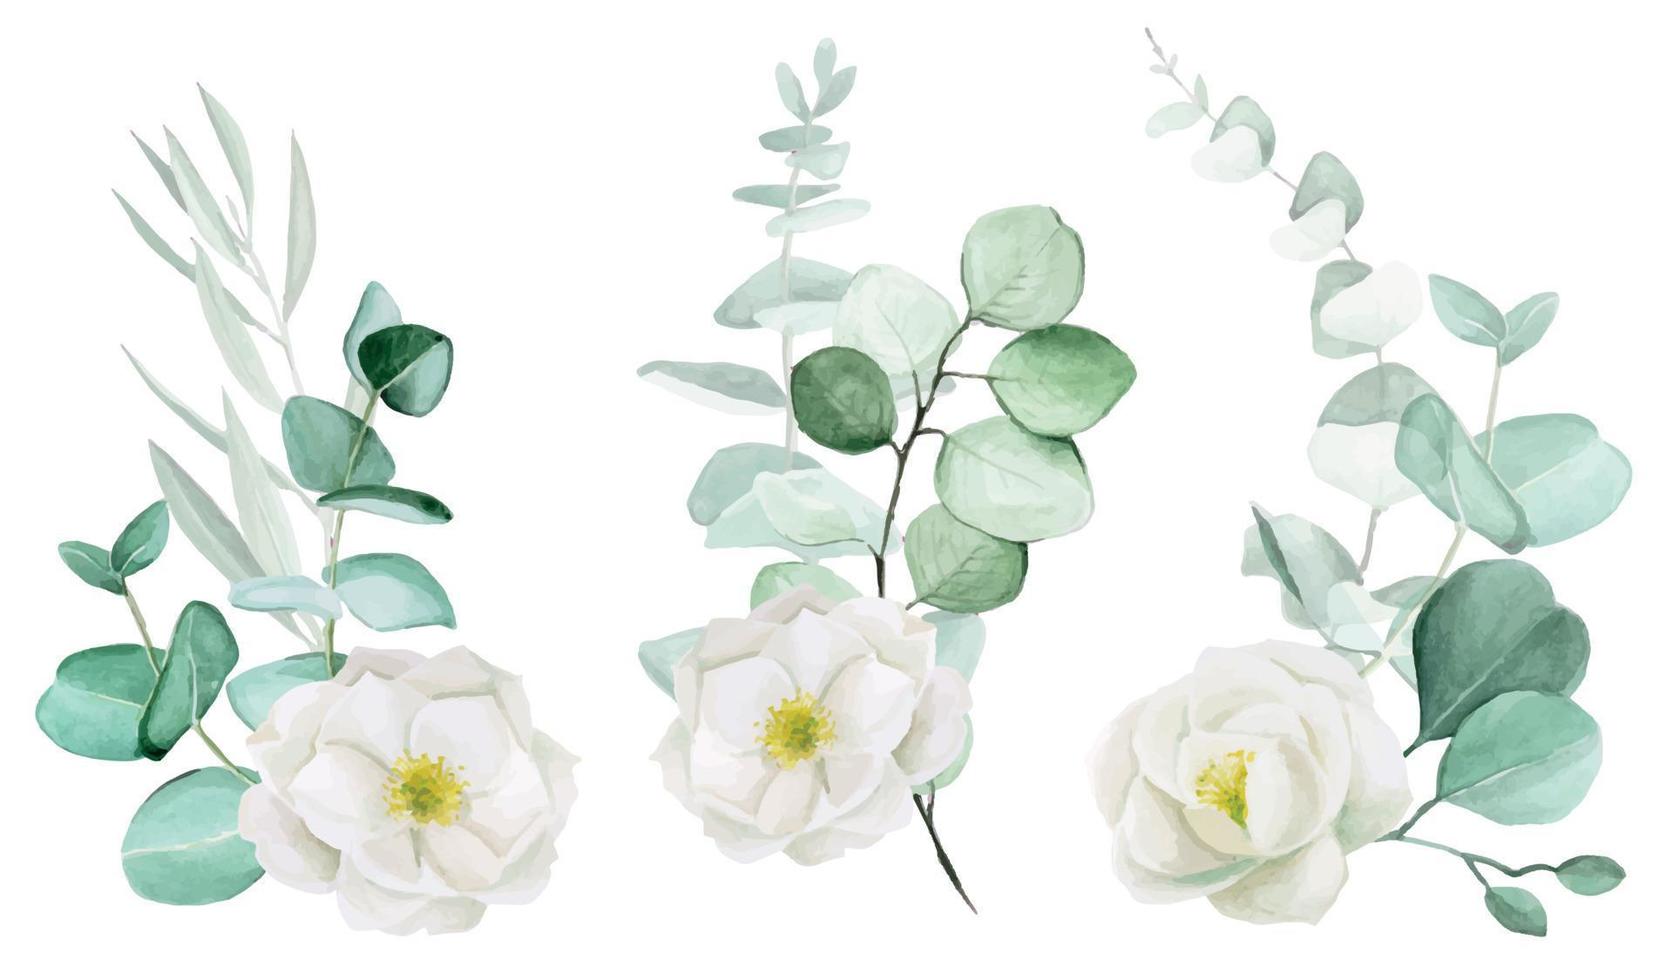 watercolor drawing, a set of bouquets of white rosehip flowers and eucalyptus leaves. clip art design for wedding, flowers and eucalyptus leaves vintage style vector